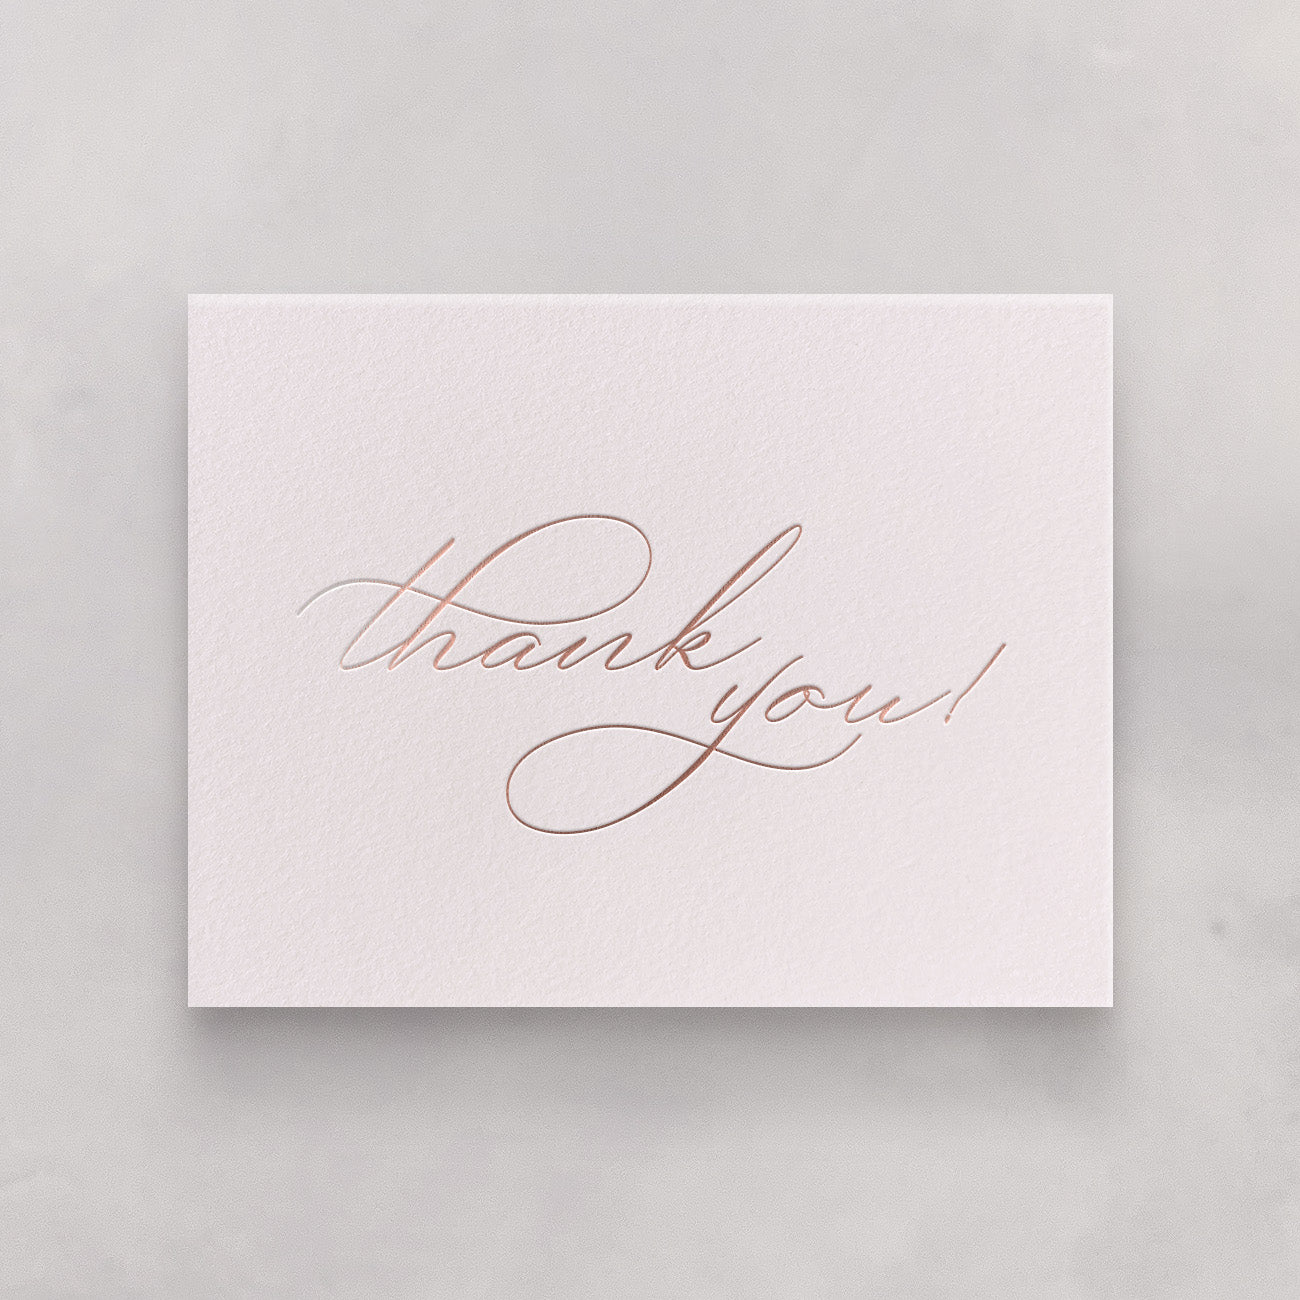 Signature Thank You Cards